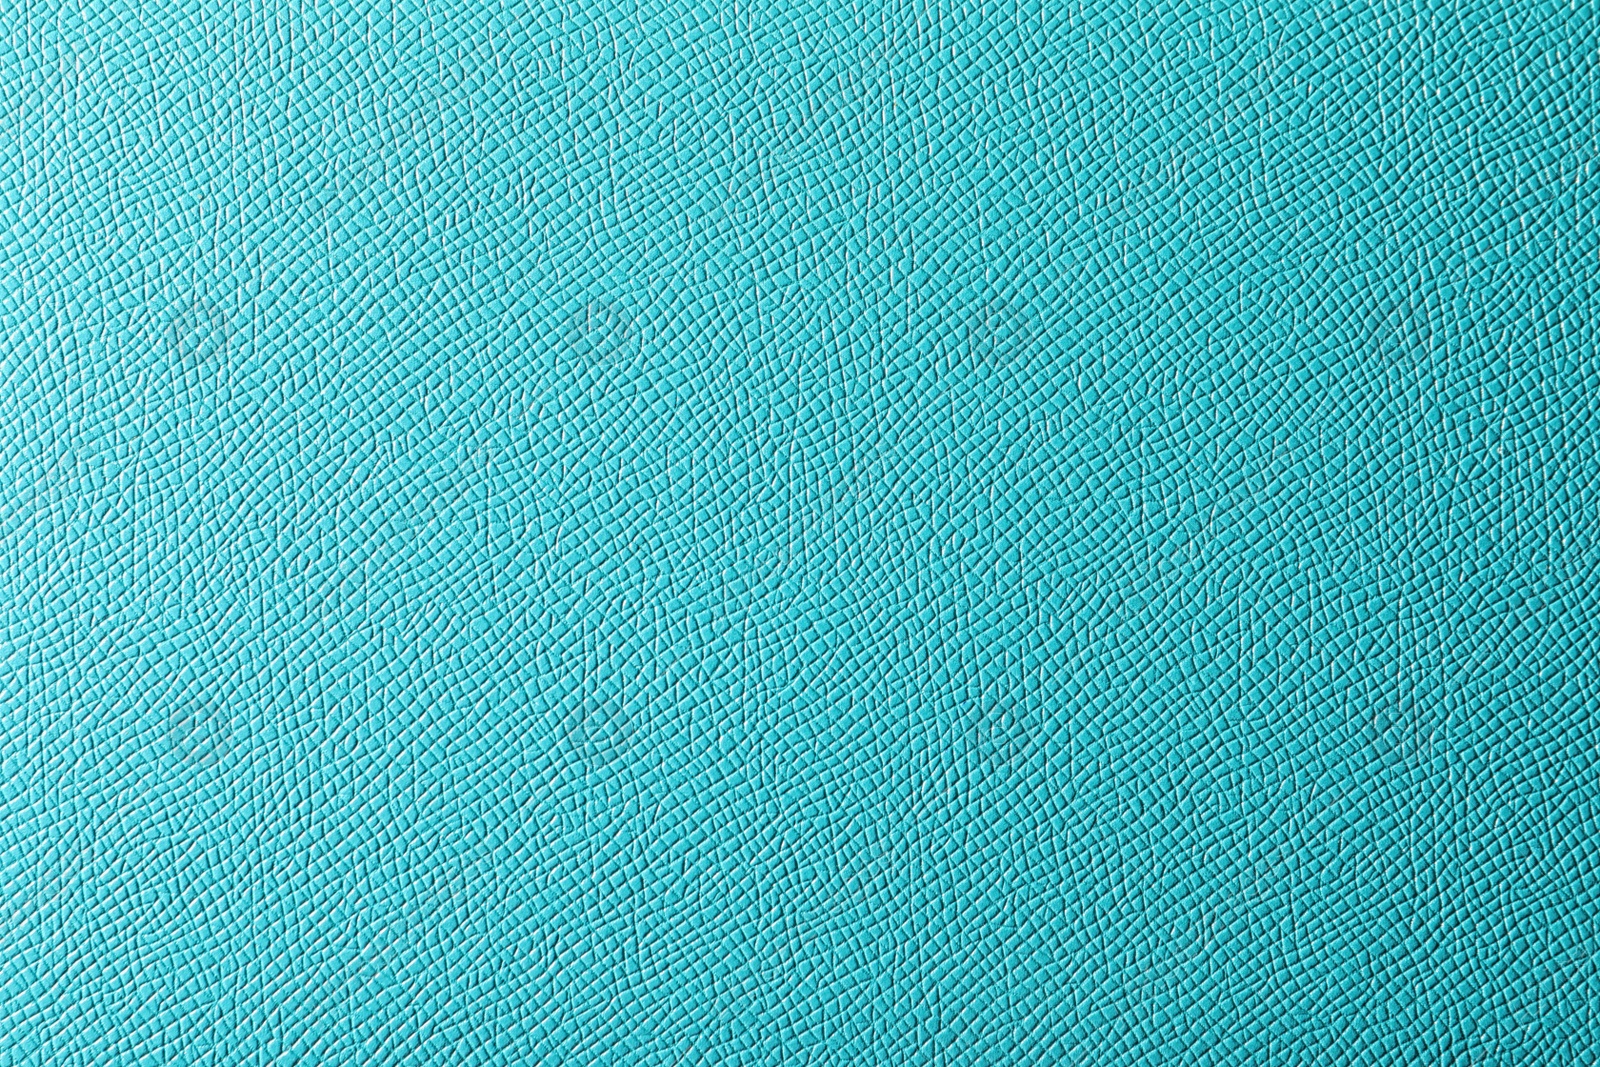 Photo of Texture of turquoise leather as background, closeup